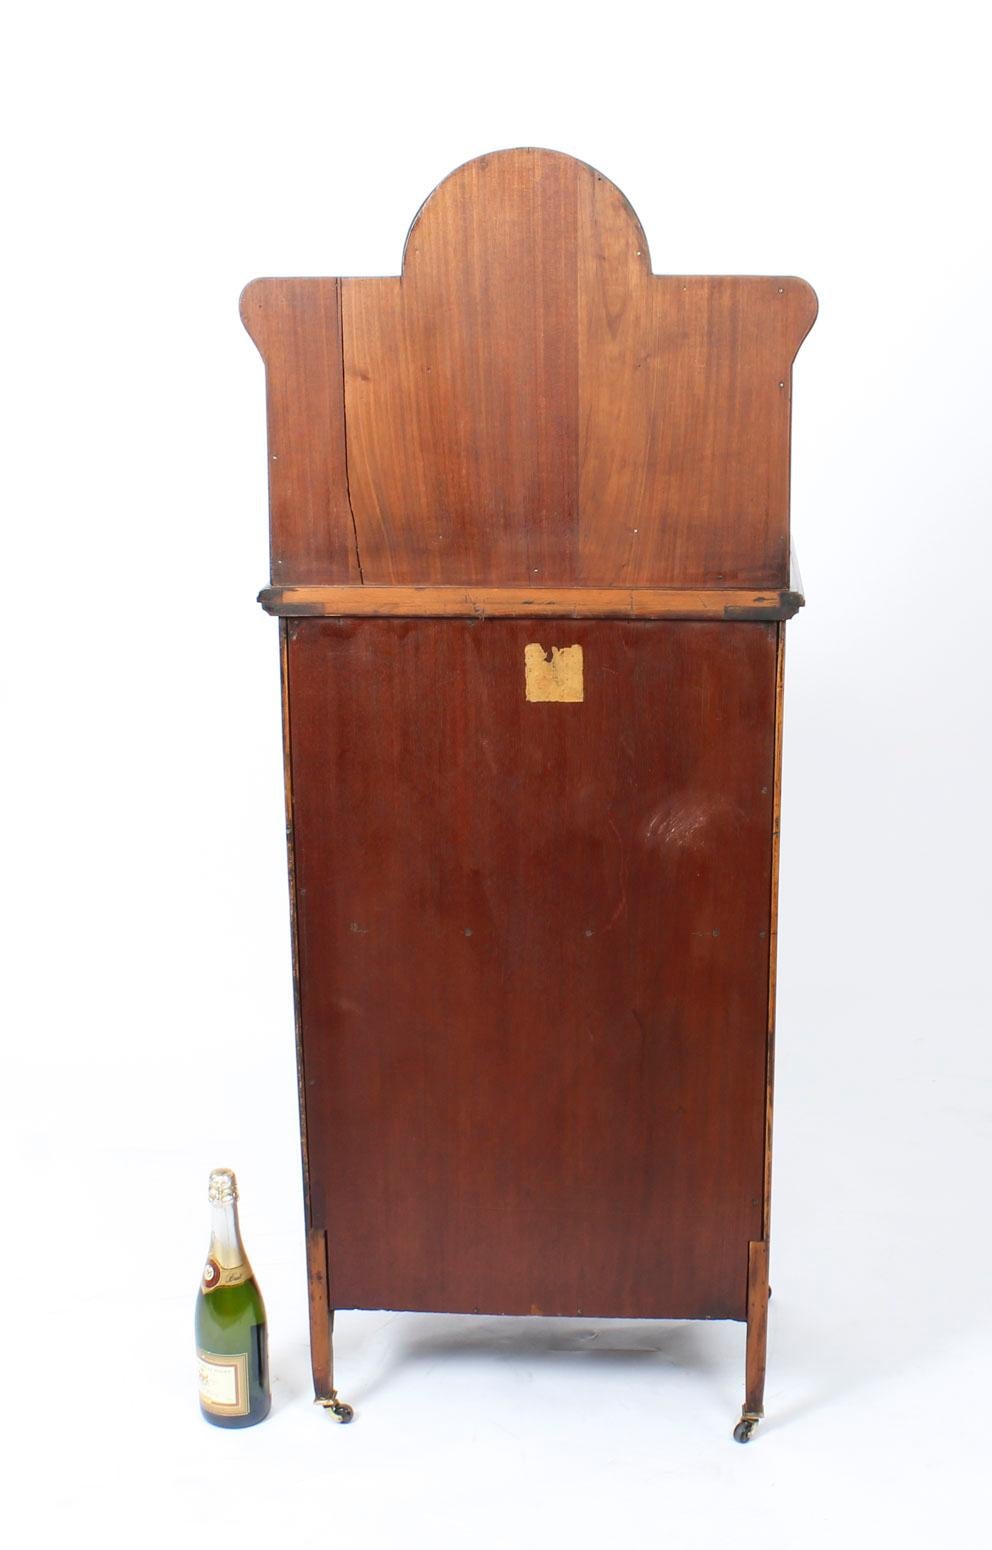 Antique Edwardian Gonçalo Alves Marquetry Inlaid Music Cabinet 19th Century For Sale 8